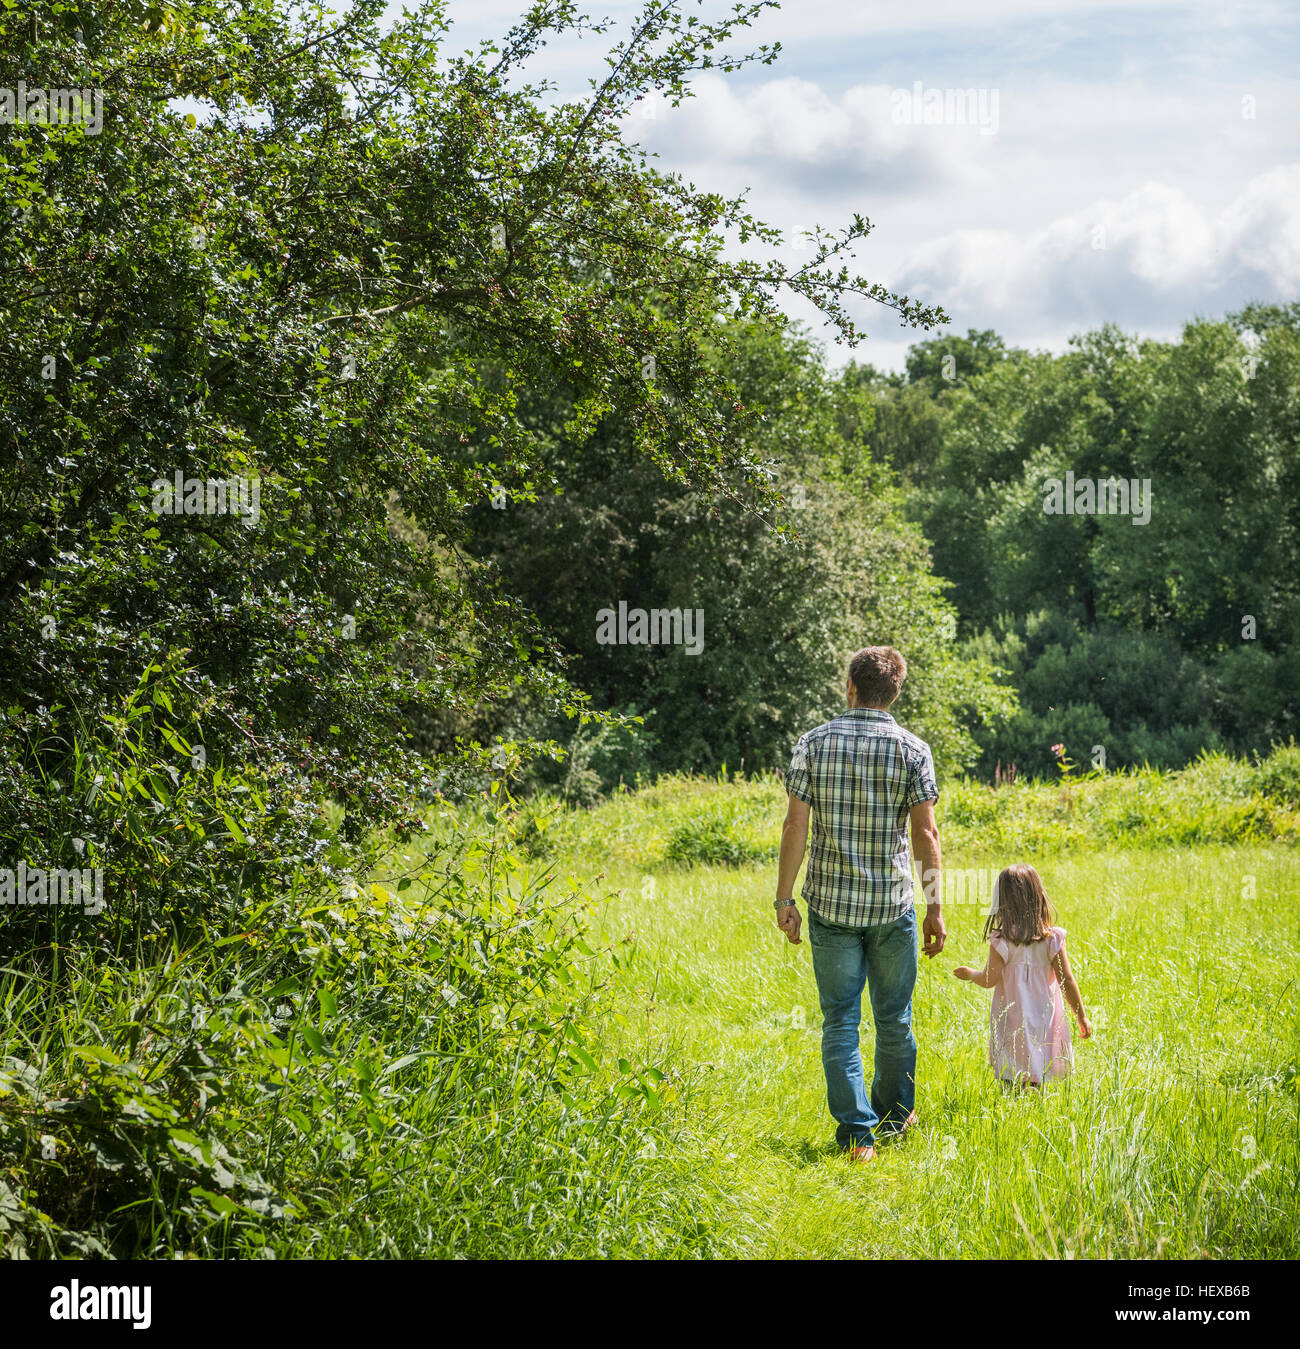 Rear view of father and daughter walking through meadow, Porta Westfalica, North Rhine Westphalia, Germany Stock Photo